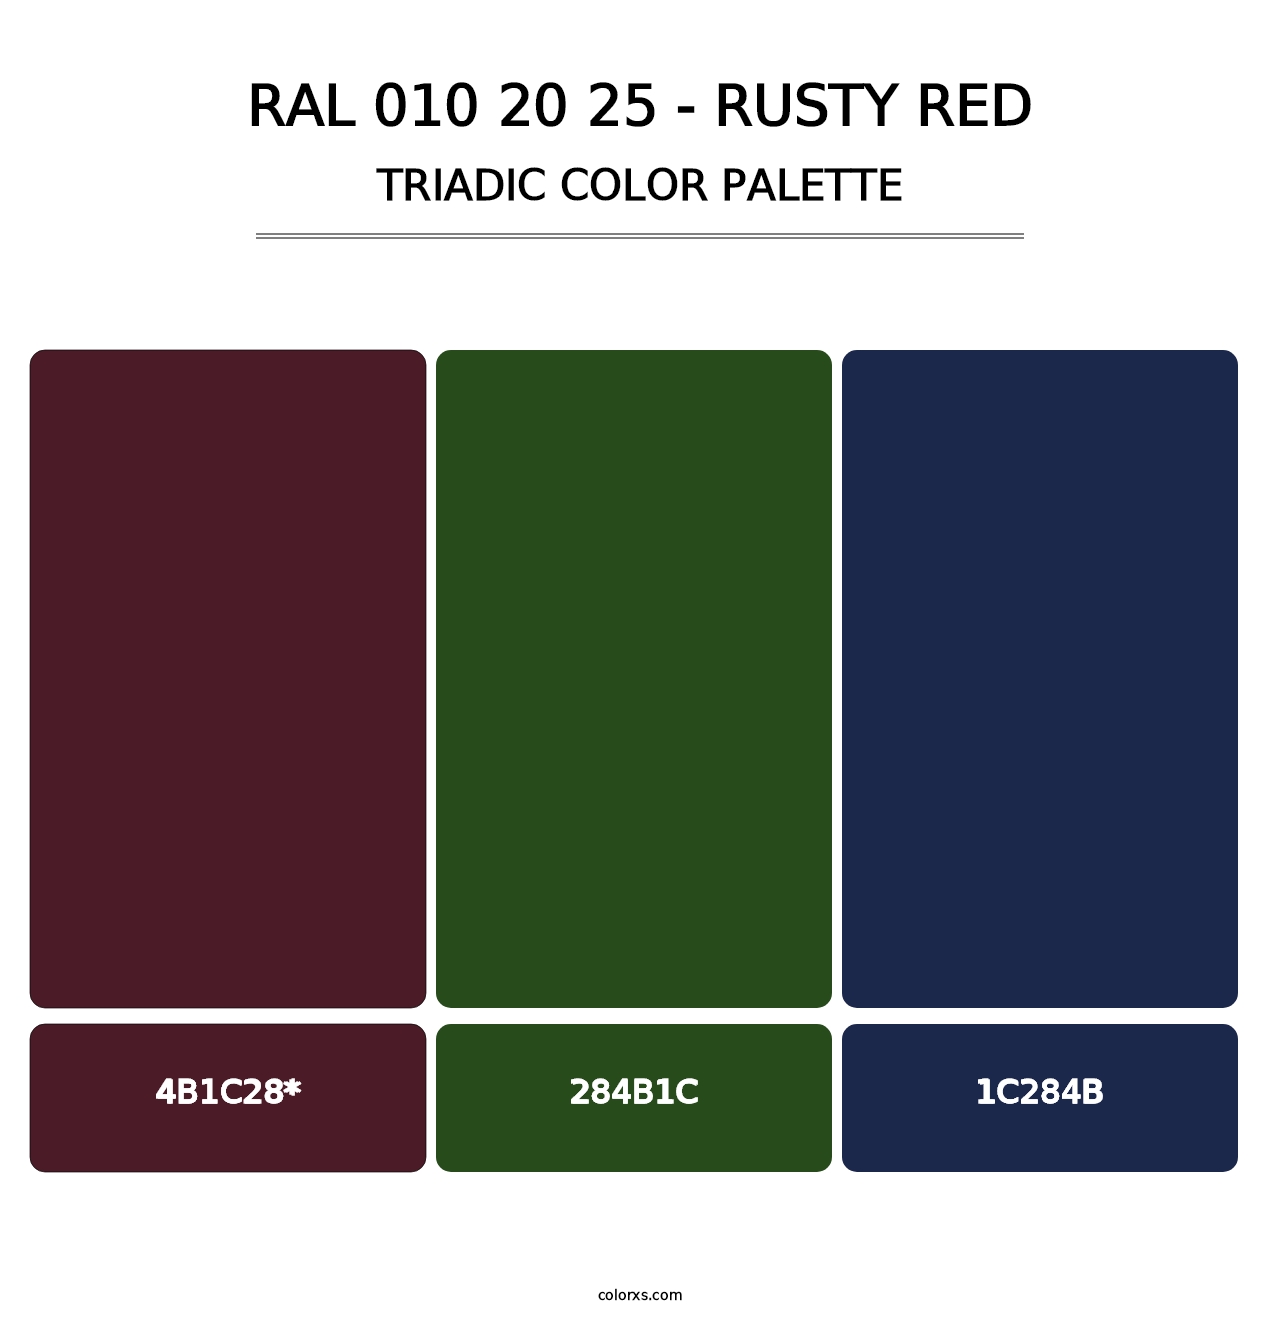 RAL 010 20 25 - Rusty Red - Triadic Color Palette